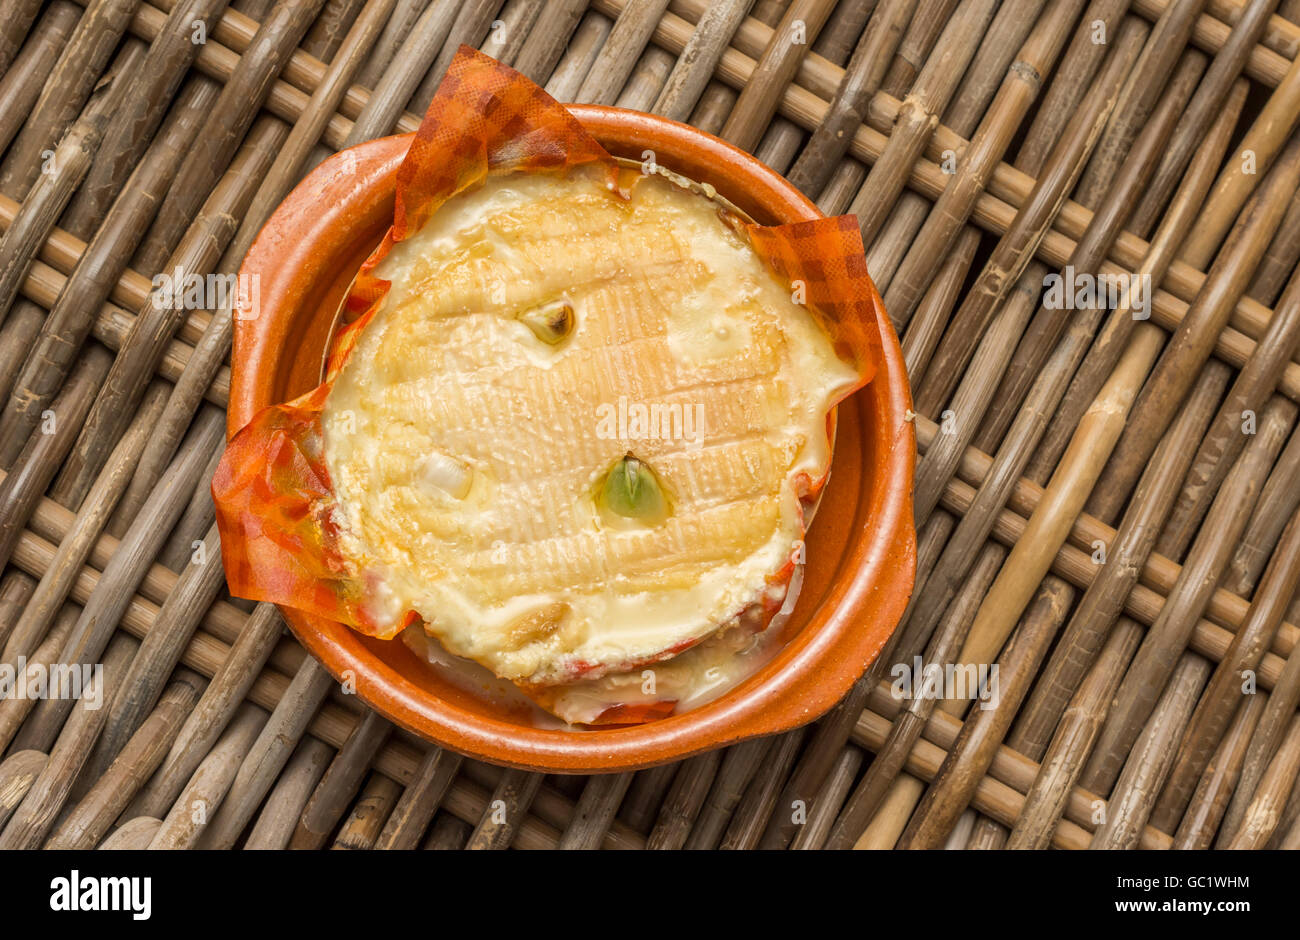 French camembert baked with cloves of garlic Stock Photo